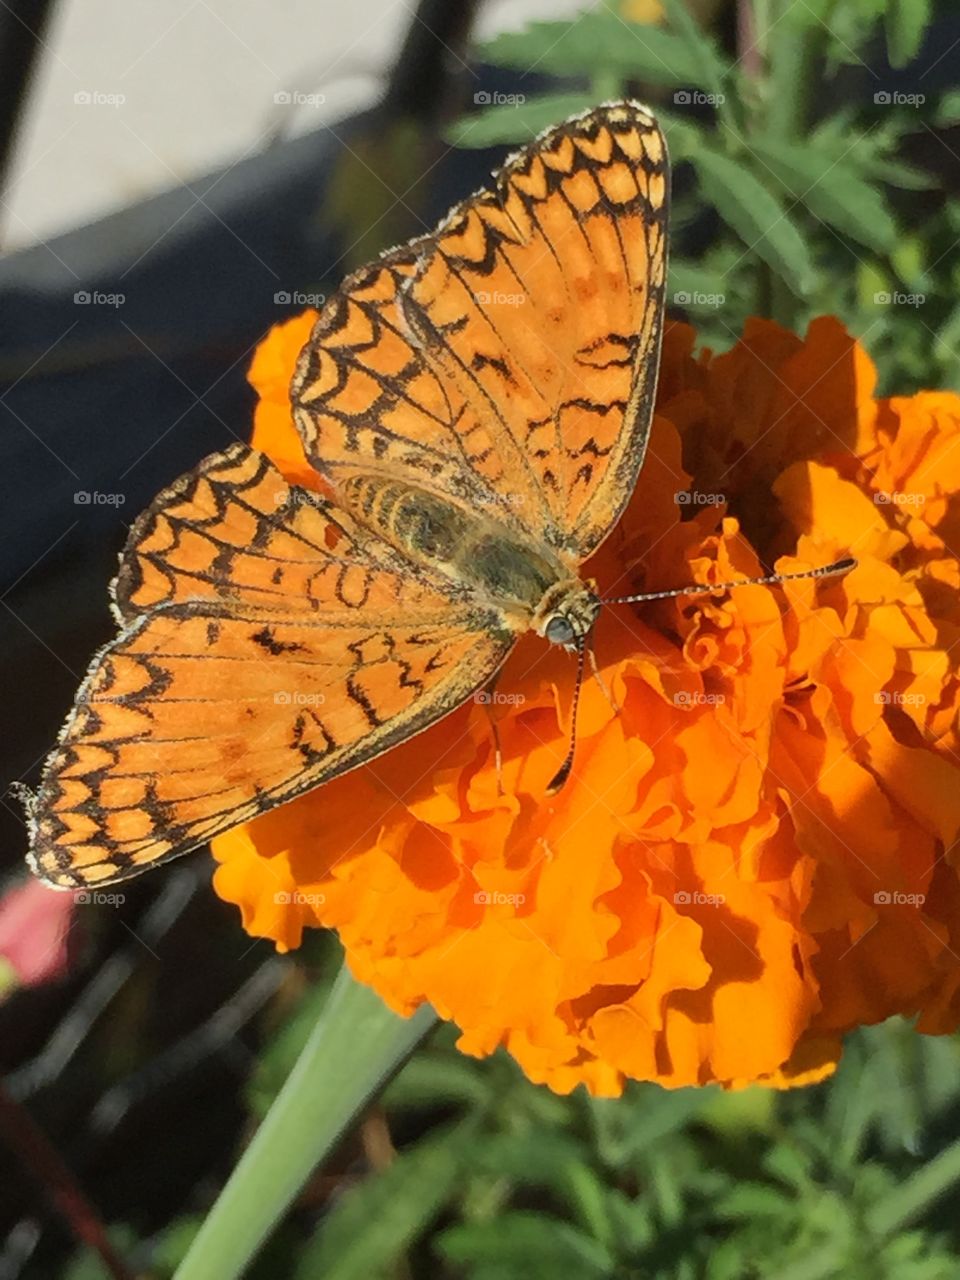 Butterfly and flower . Butterfly takes a rest on an orange flower